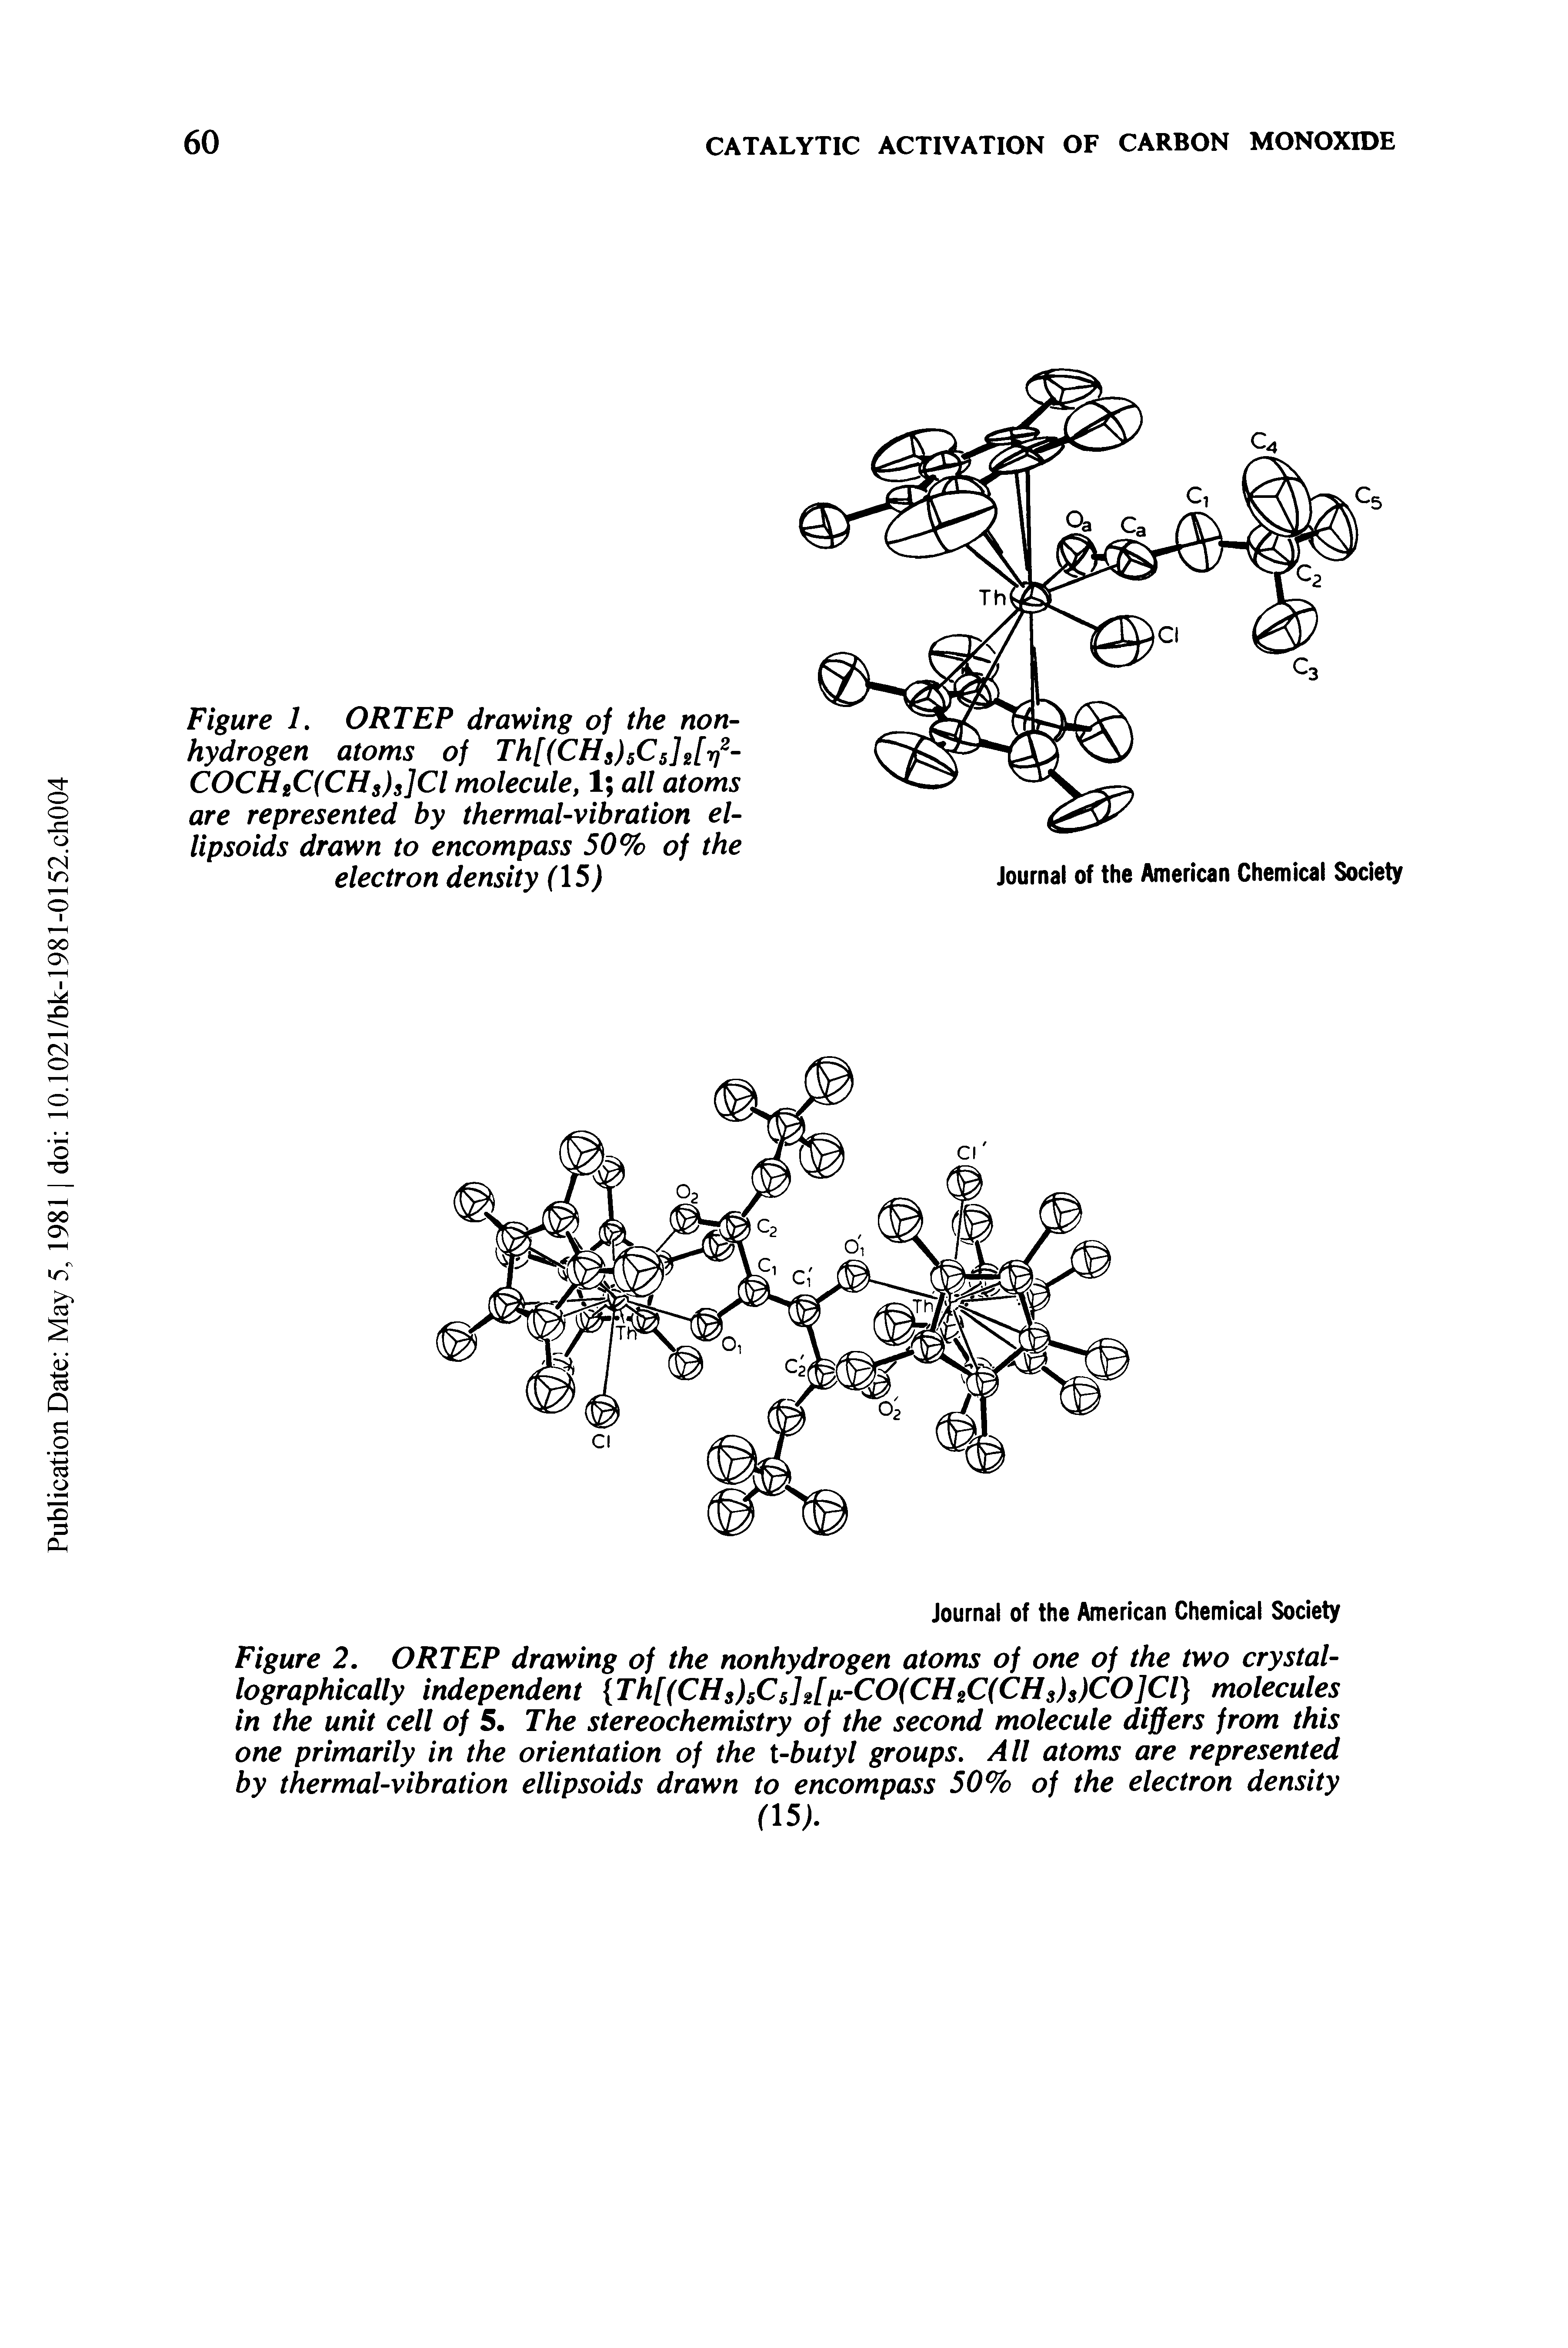 Figure 1. ORTEP drawing of the nonhydrogen atoms of ThMCHsfsCsJzfa2-COCHgC(CHs)s]Cl molecule, 1 all atoms are represented by thermal-vibration ellipsoids drawn to encompass 50% of the electron density (15)...